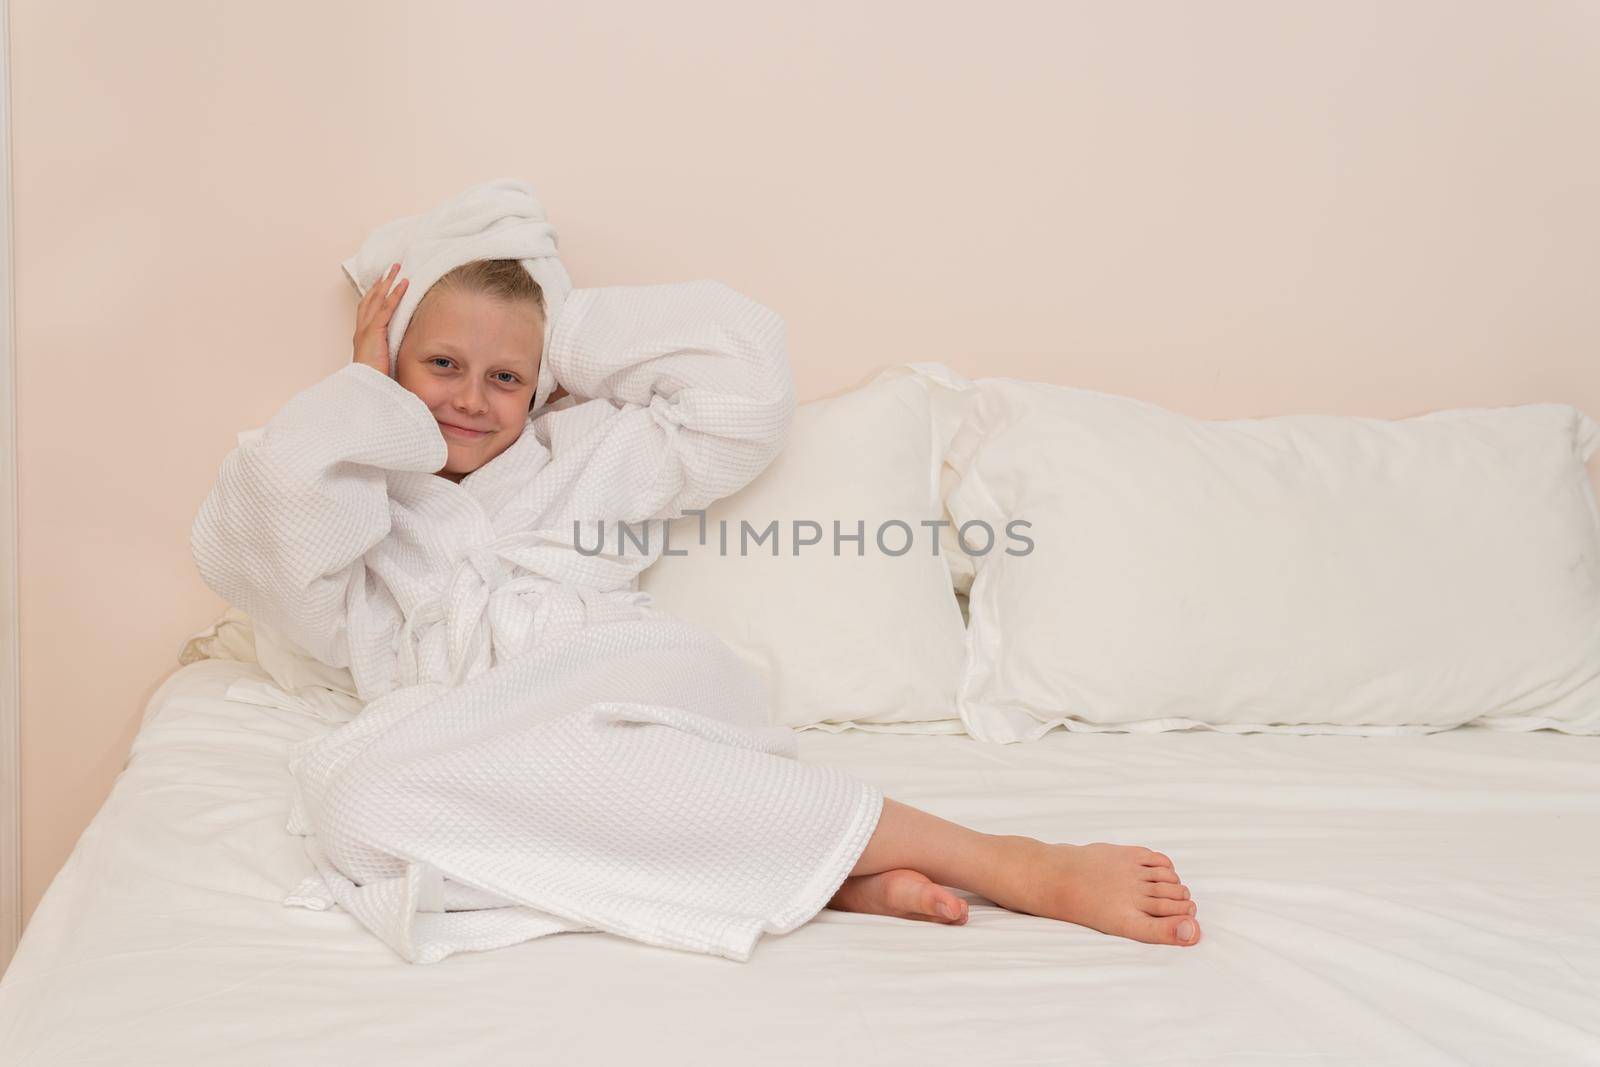 Head smile bathrobe girl bed copyspace white portrait cute people, concept dressing young from skin from spa pirate, child bathing. Health female comfort,